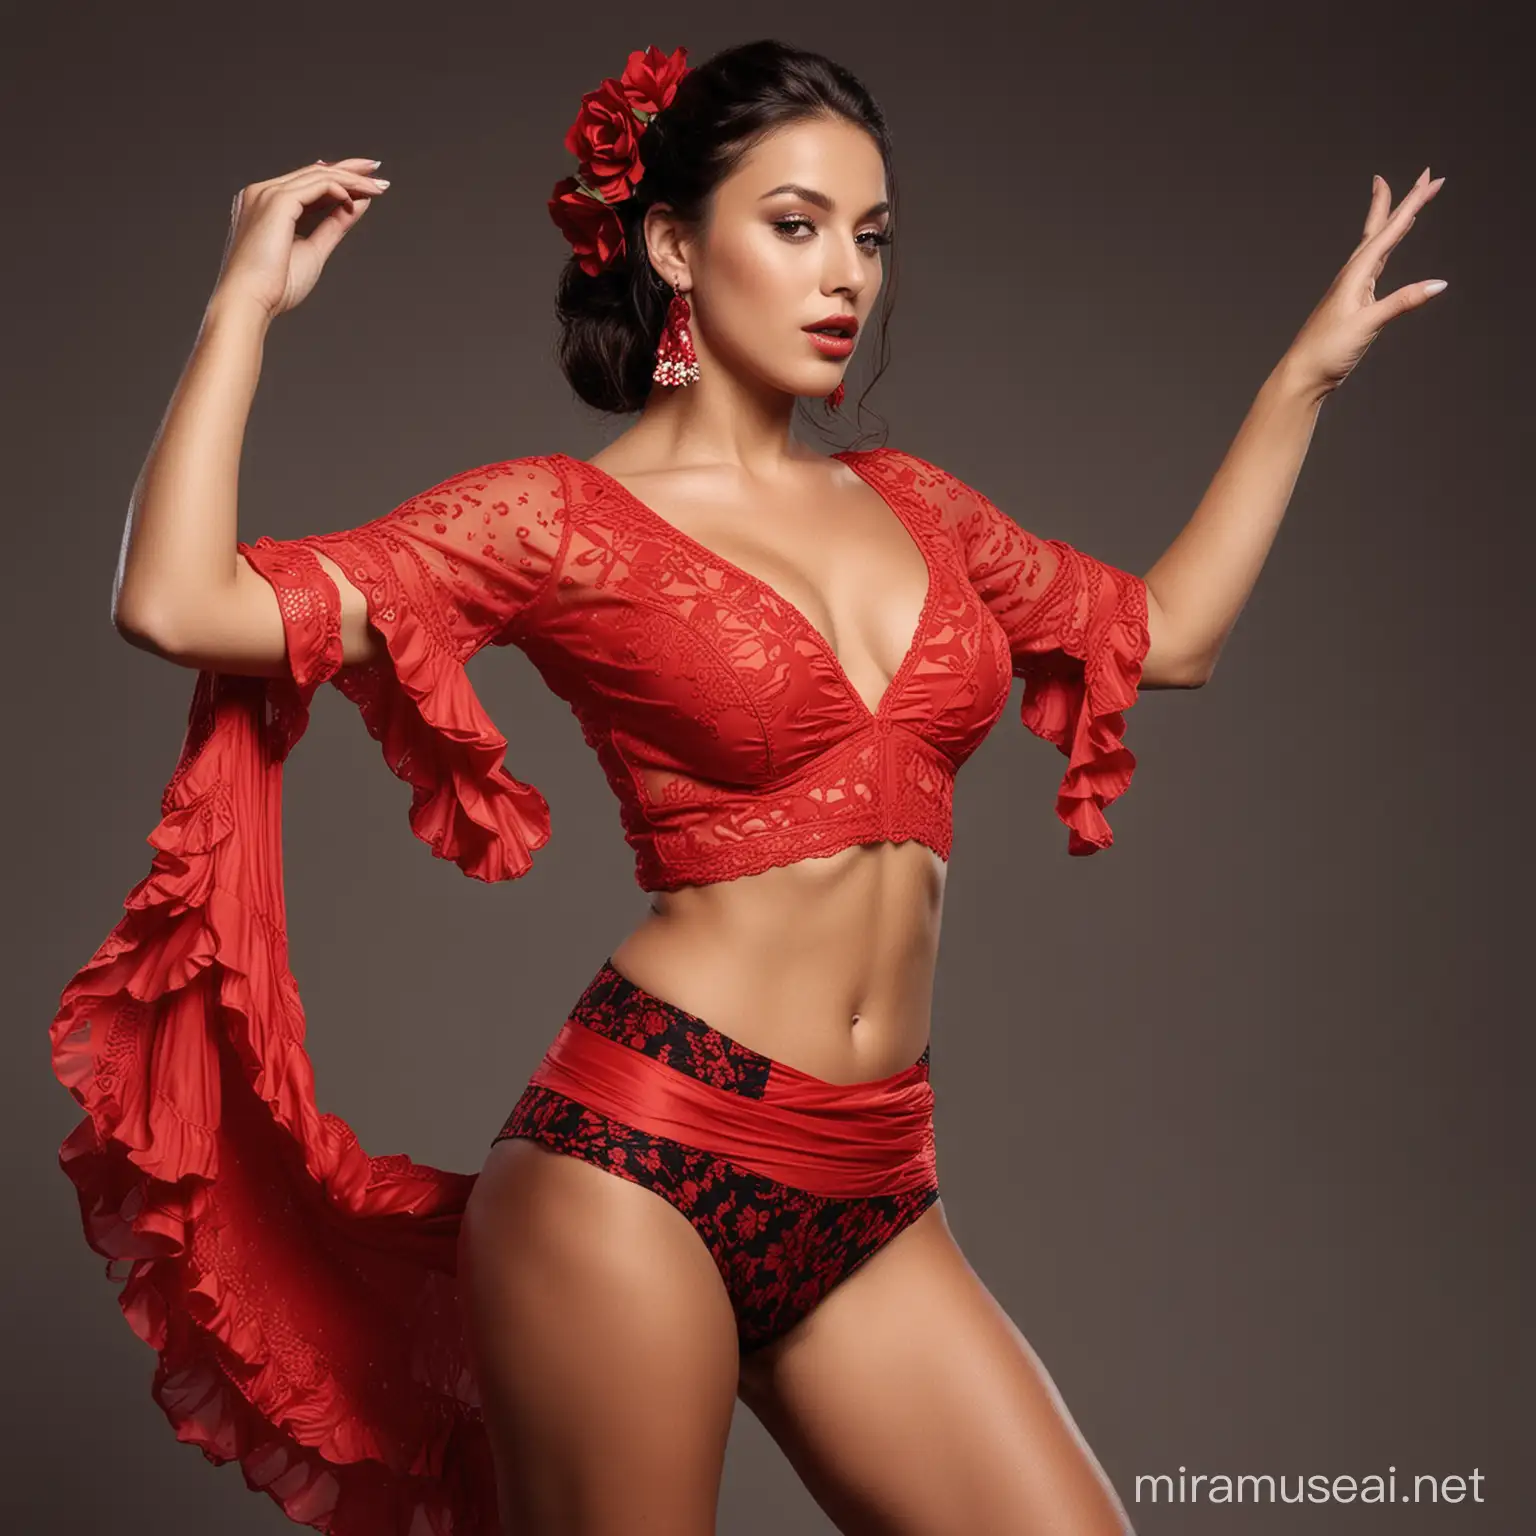 Sensual Flamenco Dancer Performing with Elegance and Passion